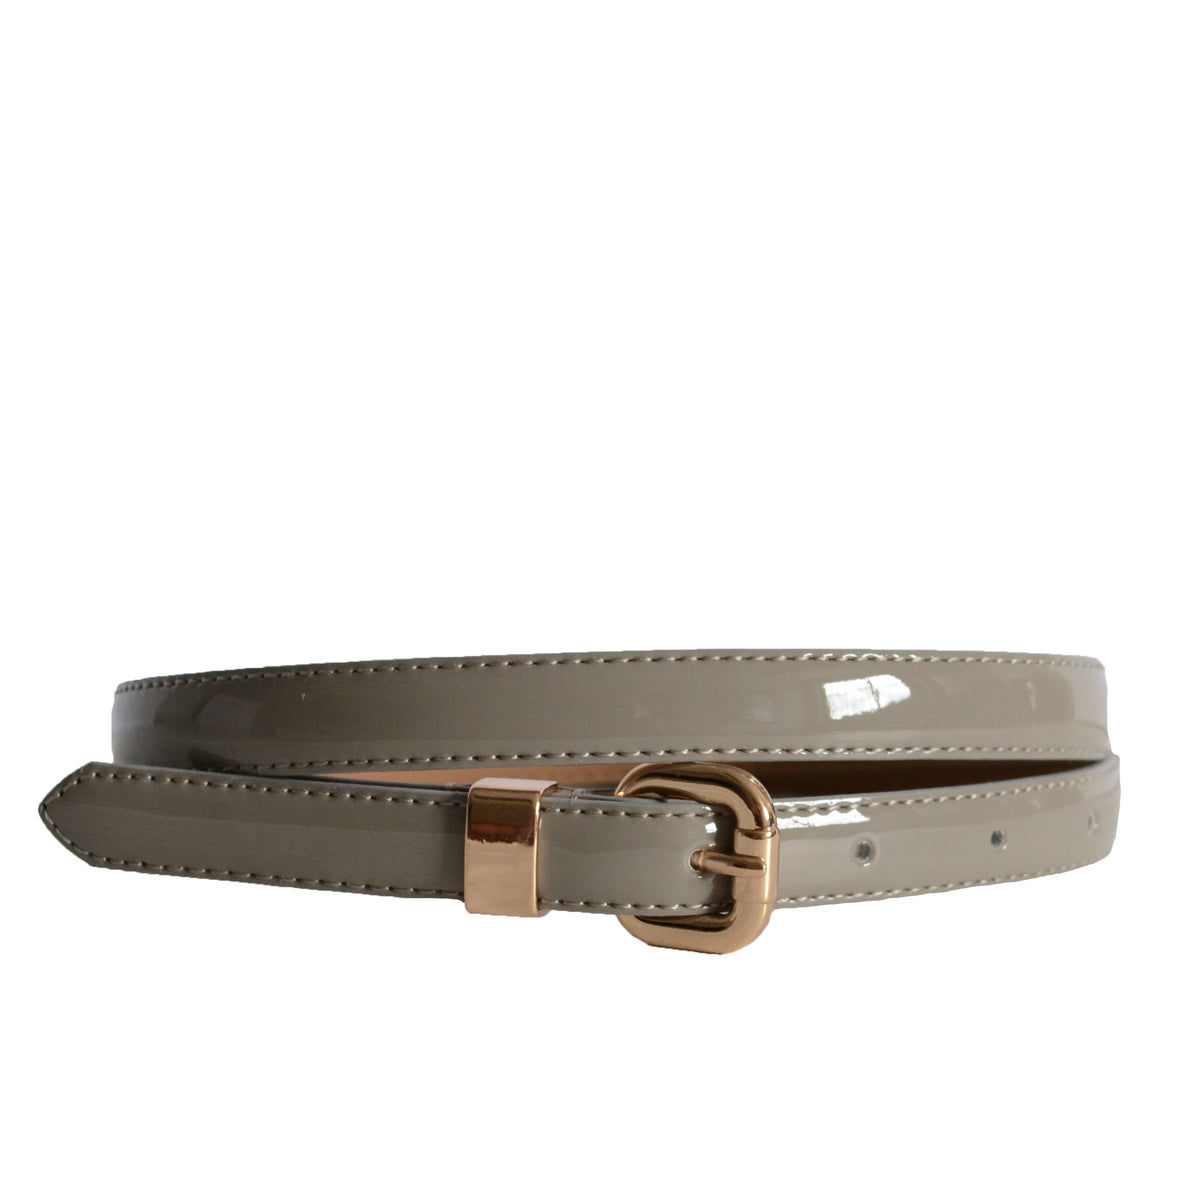 Queens Park - Womens Skinny Grey Patent Leather Belt with Gold Buckle Belts Addison Road